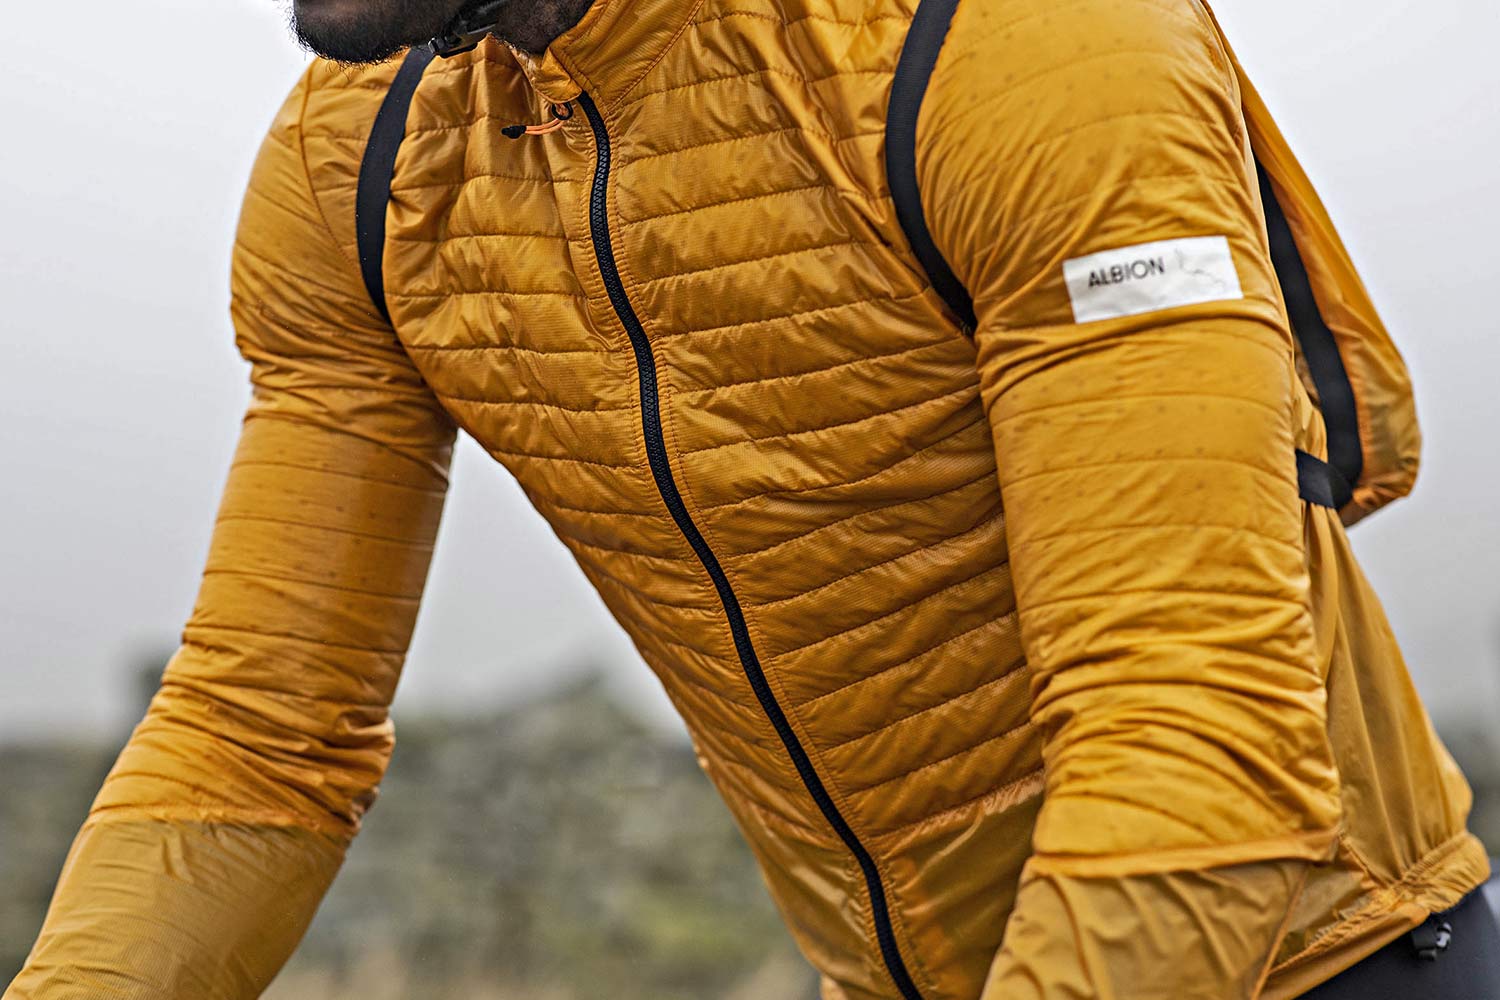 Albion Ultralight Insulated Jacket, ultra lightweight packable breathable eco cycling jacket and backpack, detail up close